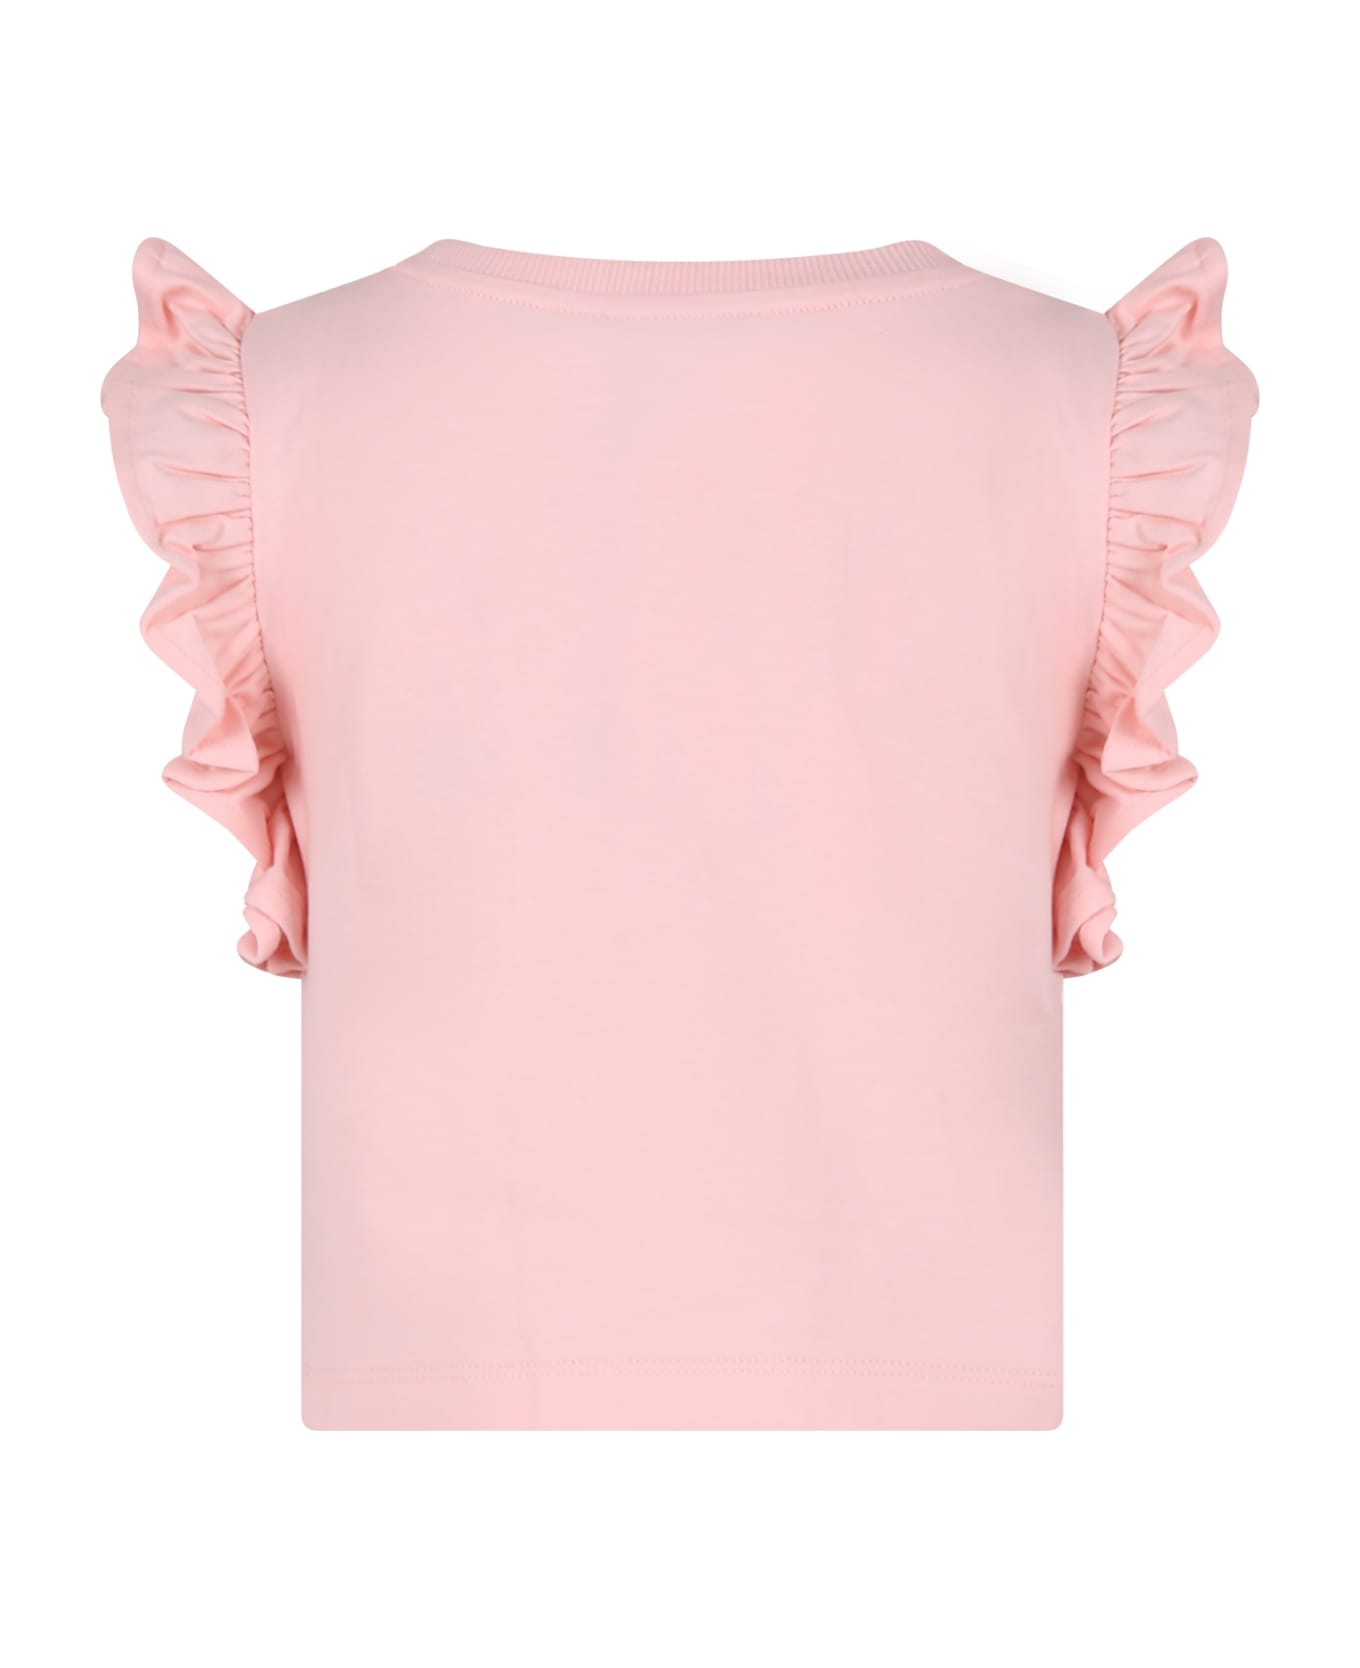 Moschino Pink T-shirt For Girl With Teddy Bear And Flamingo - Pink Tシャツ＆ポロシャツ